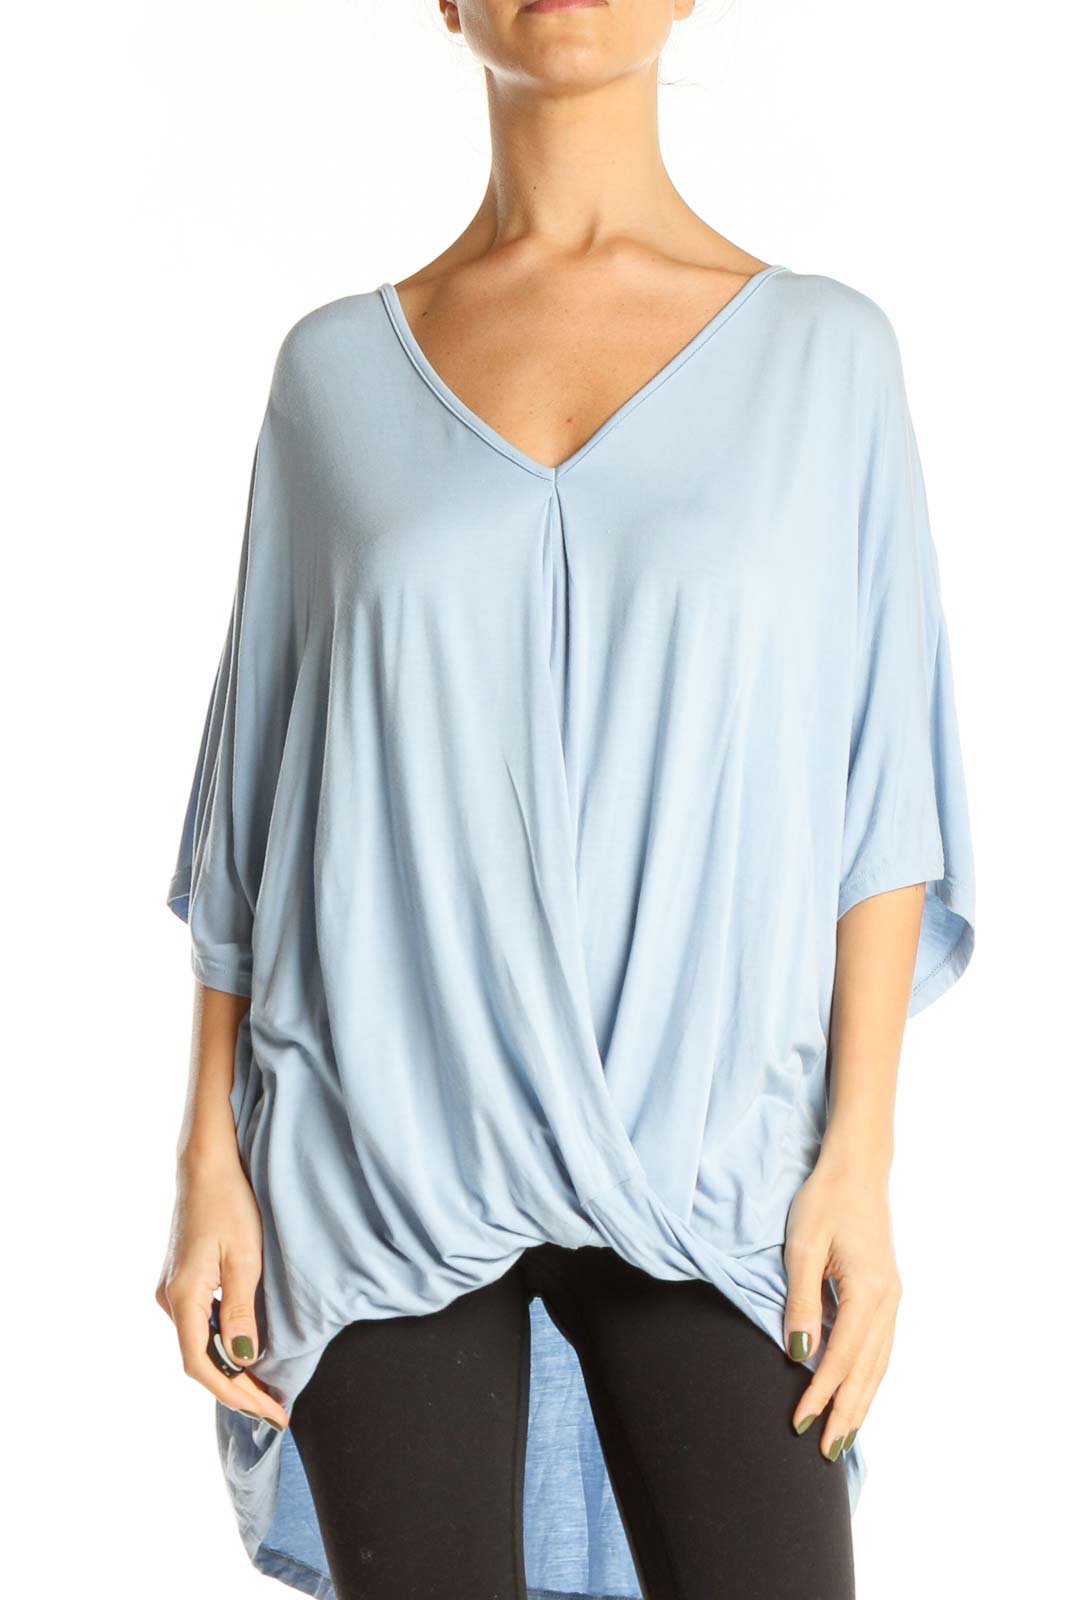 Blue Casual Drape Top Front